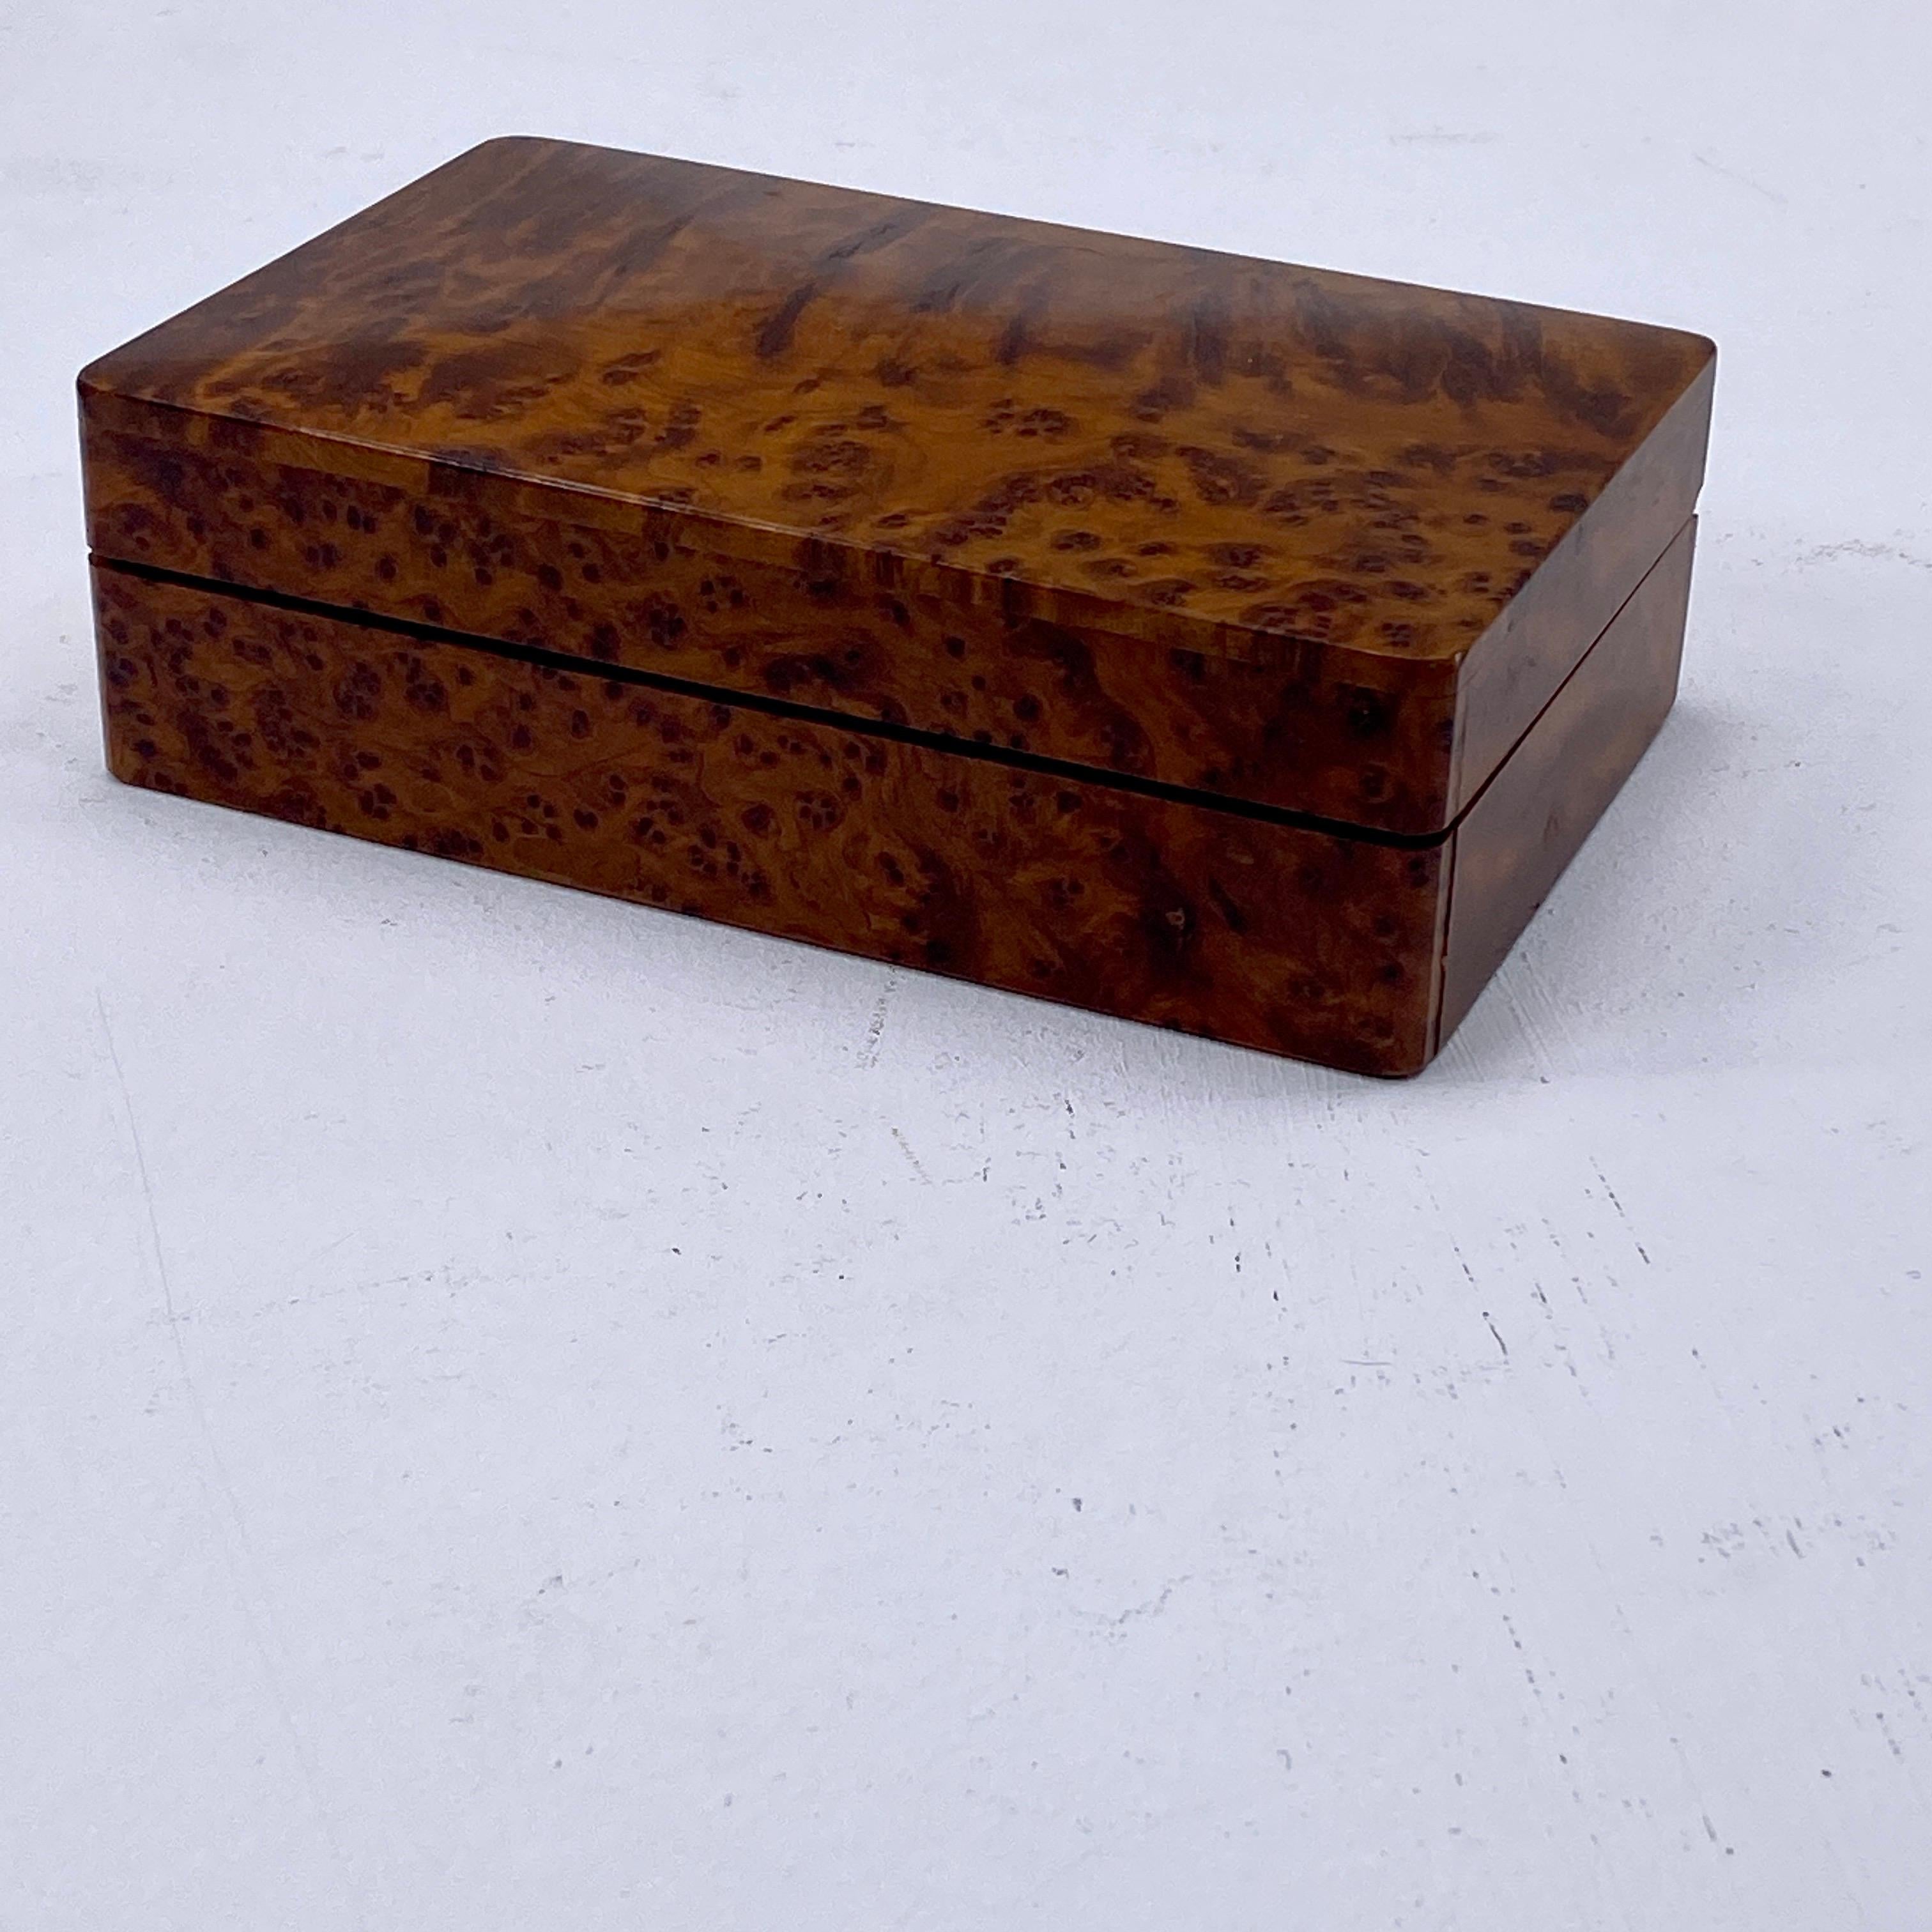 Box in Burled Wood, Brown Color, France, xx Century 1